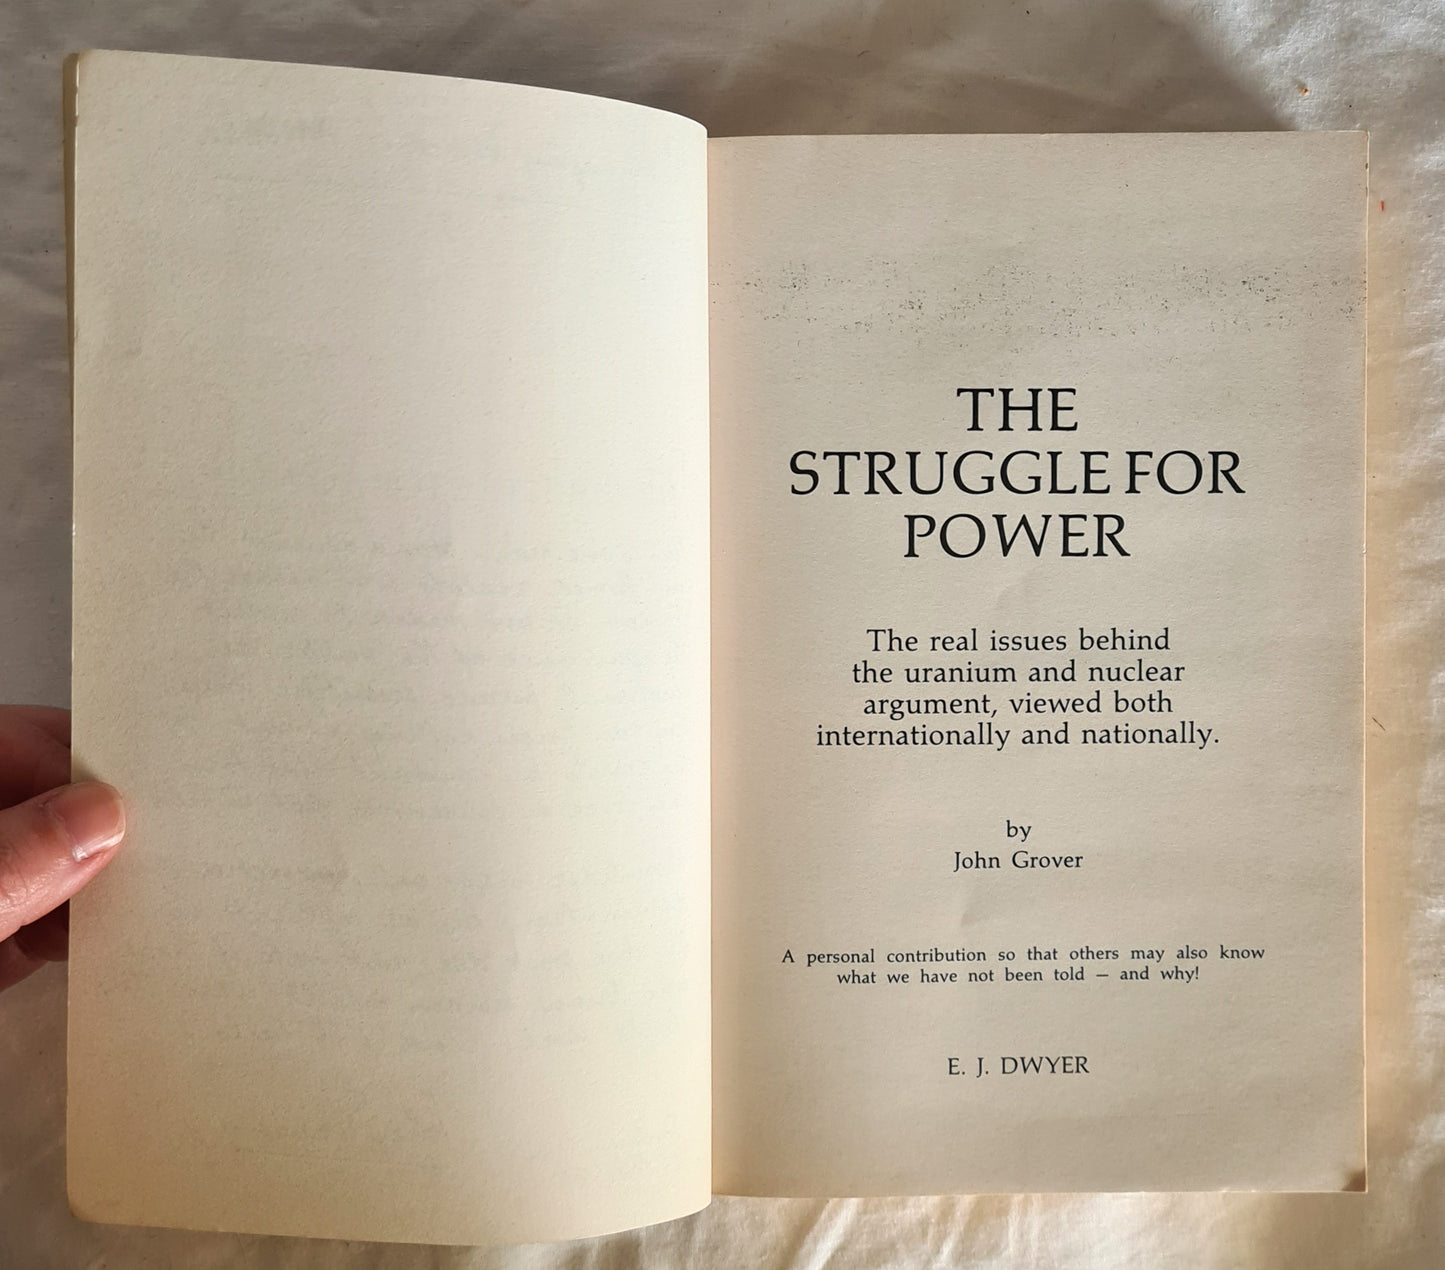 The Struggle for Power by John Grover